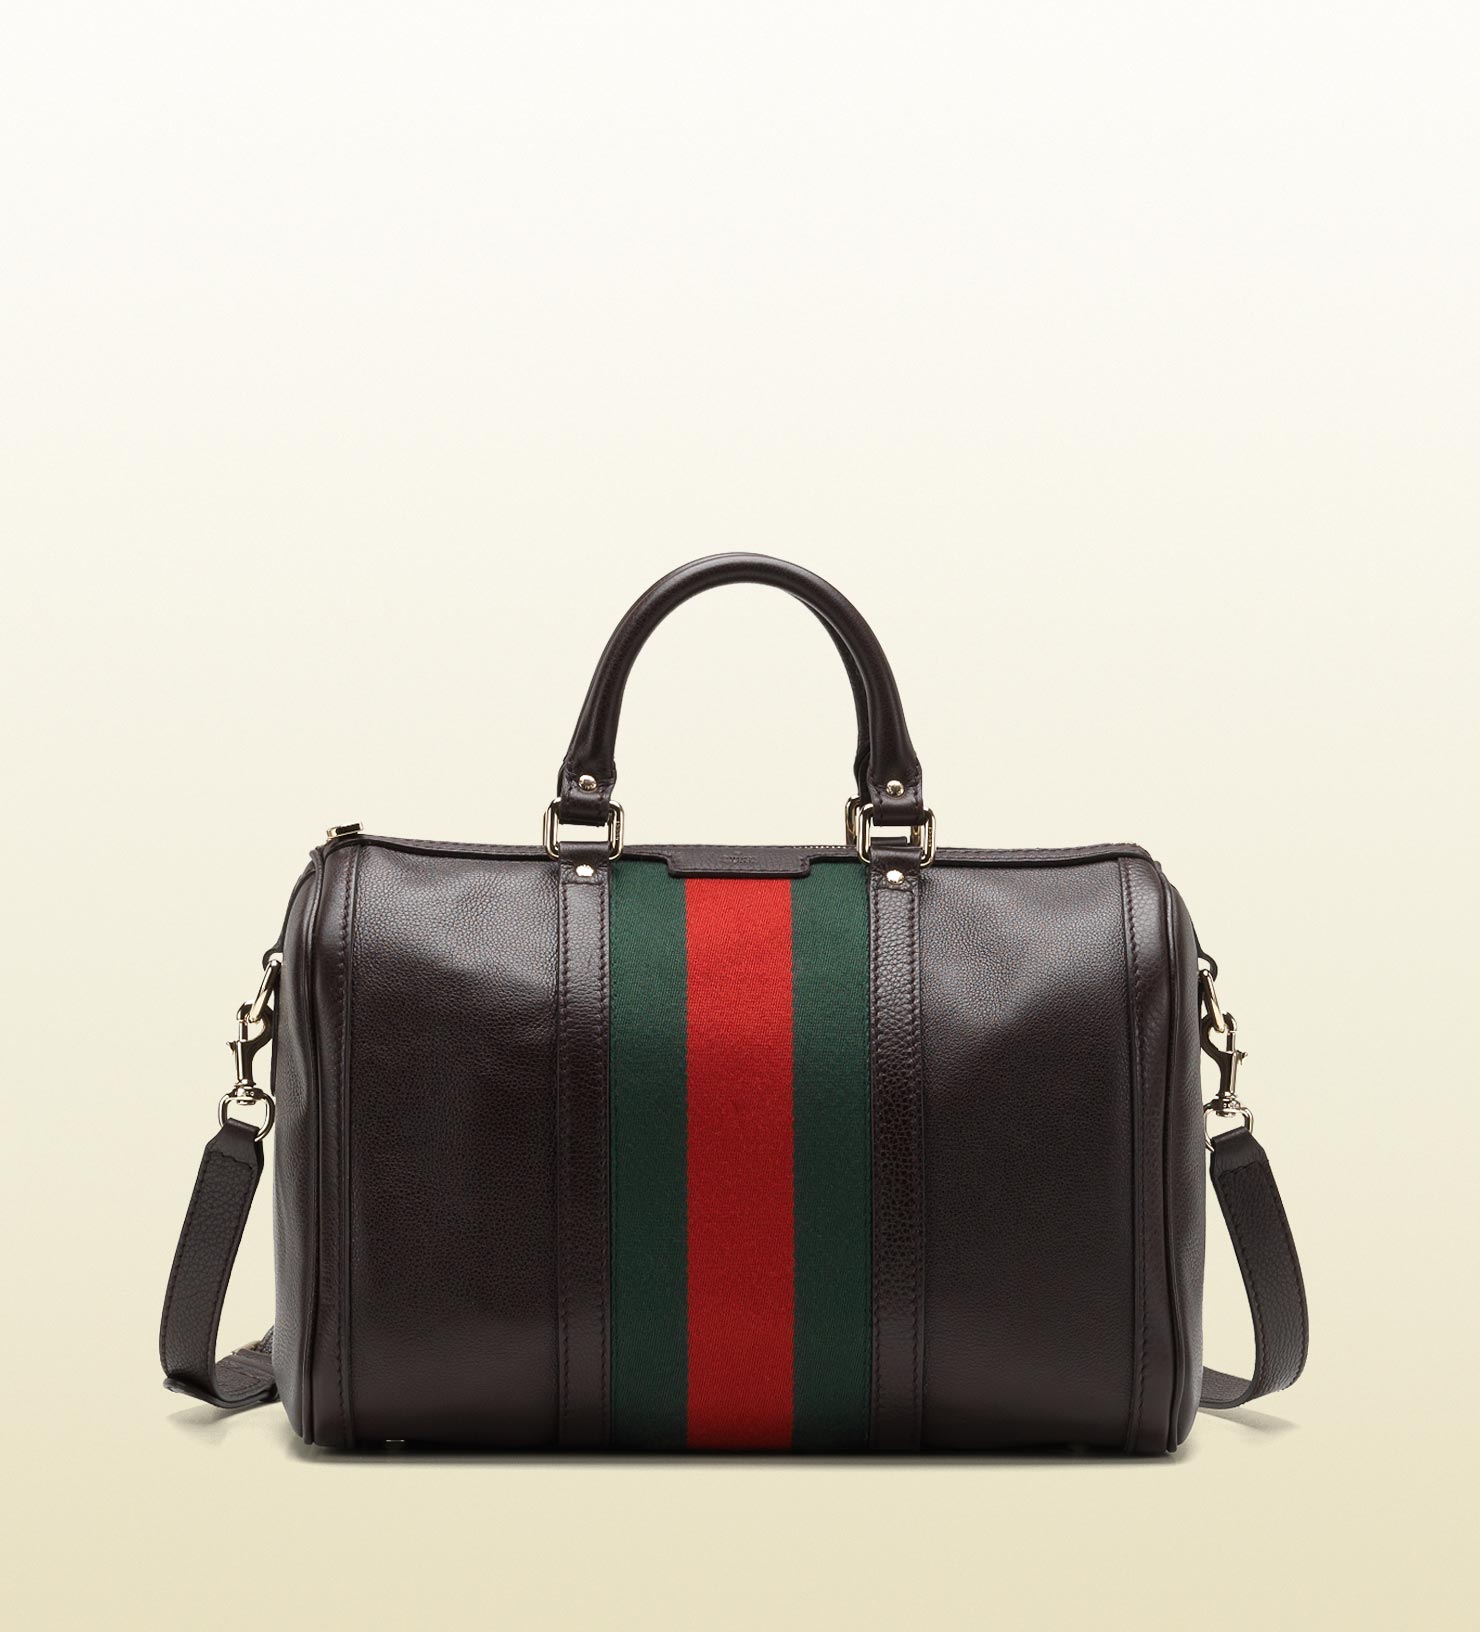 Lyst - Gucci Vintage Web Leather Boston Bag in Brown